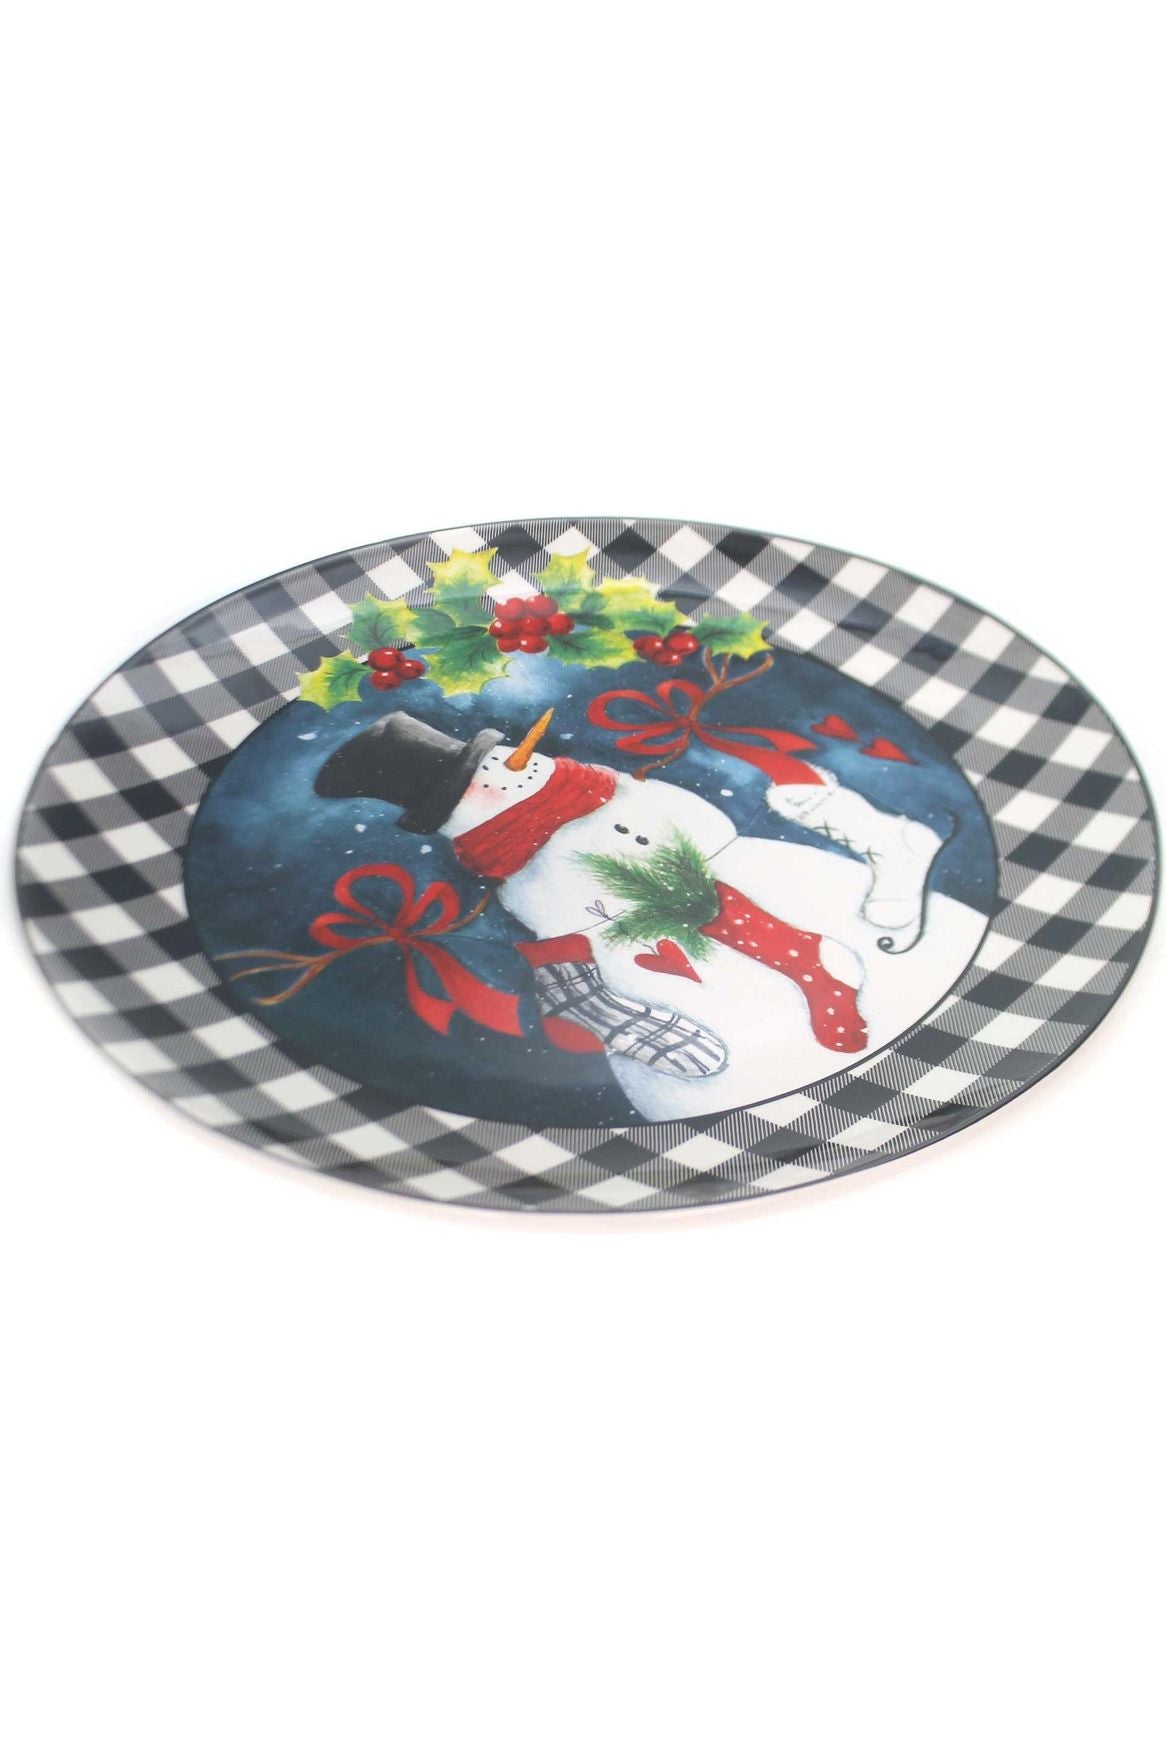 Snowman with Stockings Platter - Michelle's aDOORable Creations - Glass Fusion